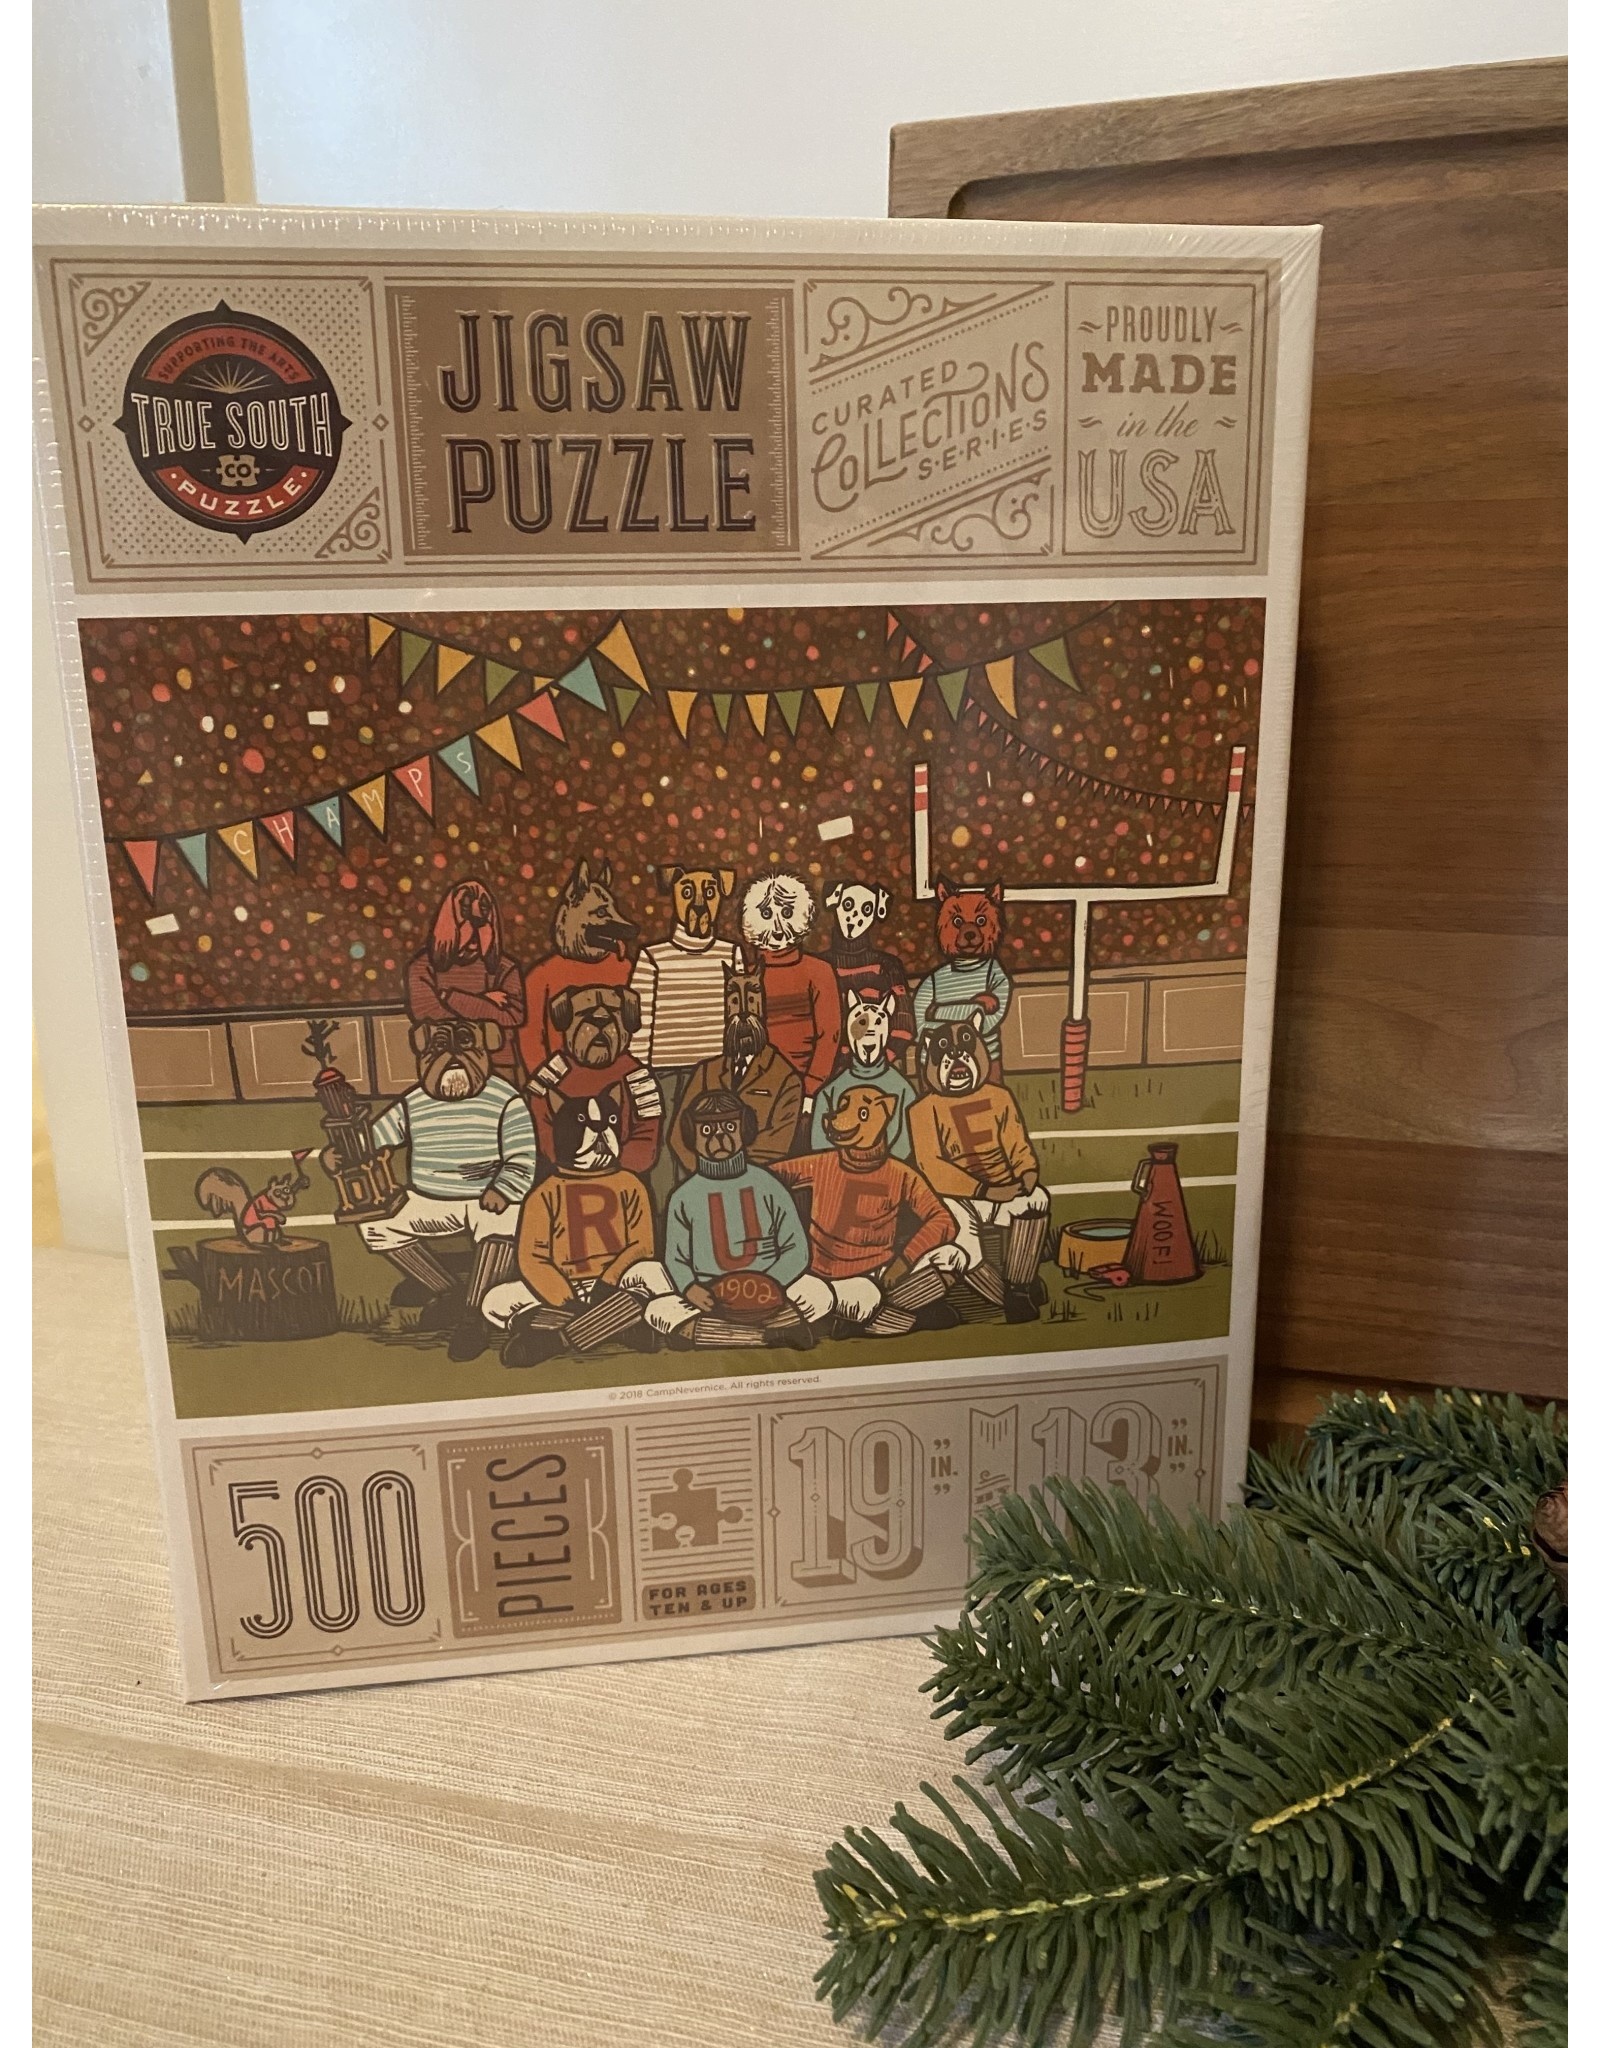 True South Football Dogs Puzzle